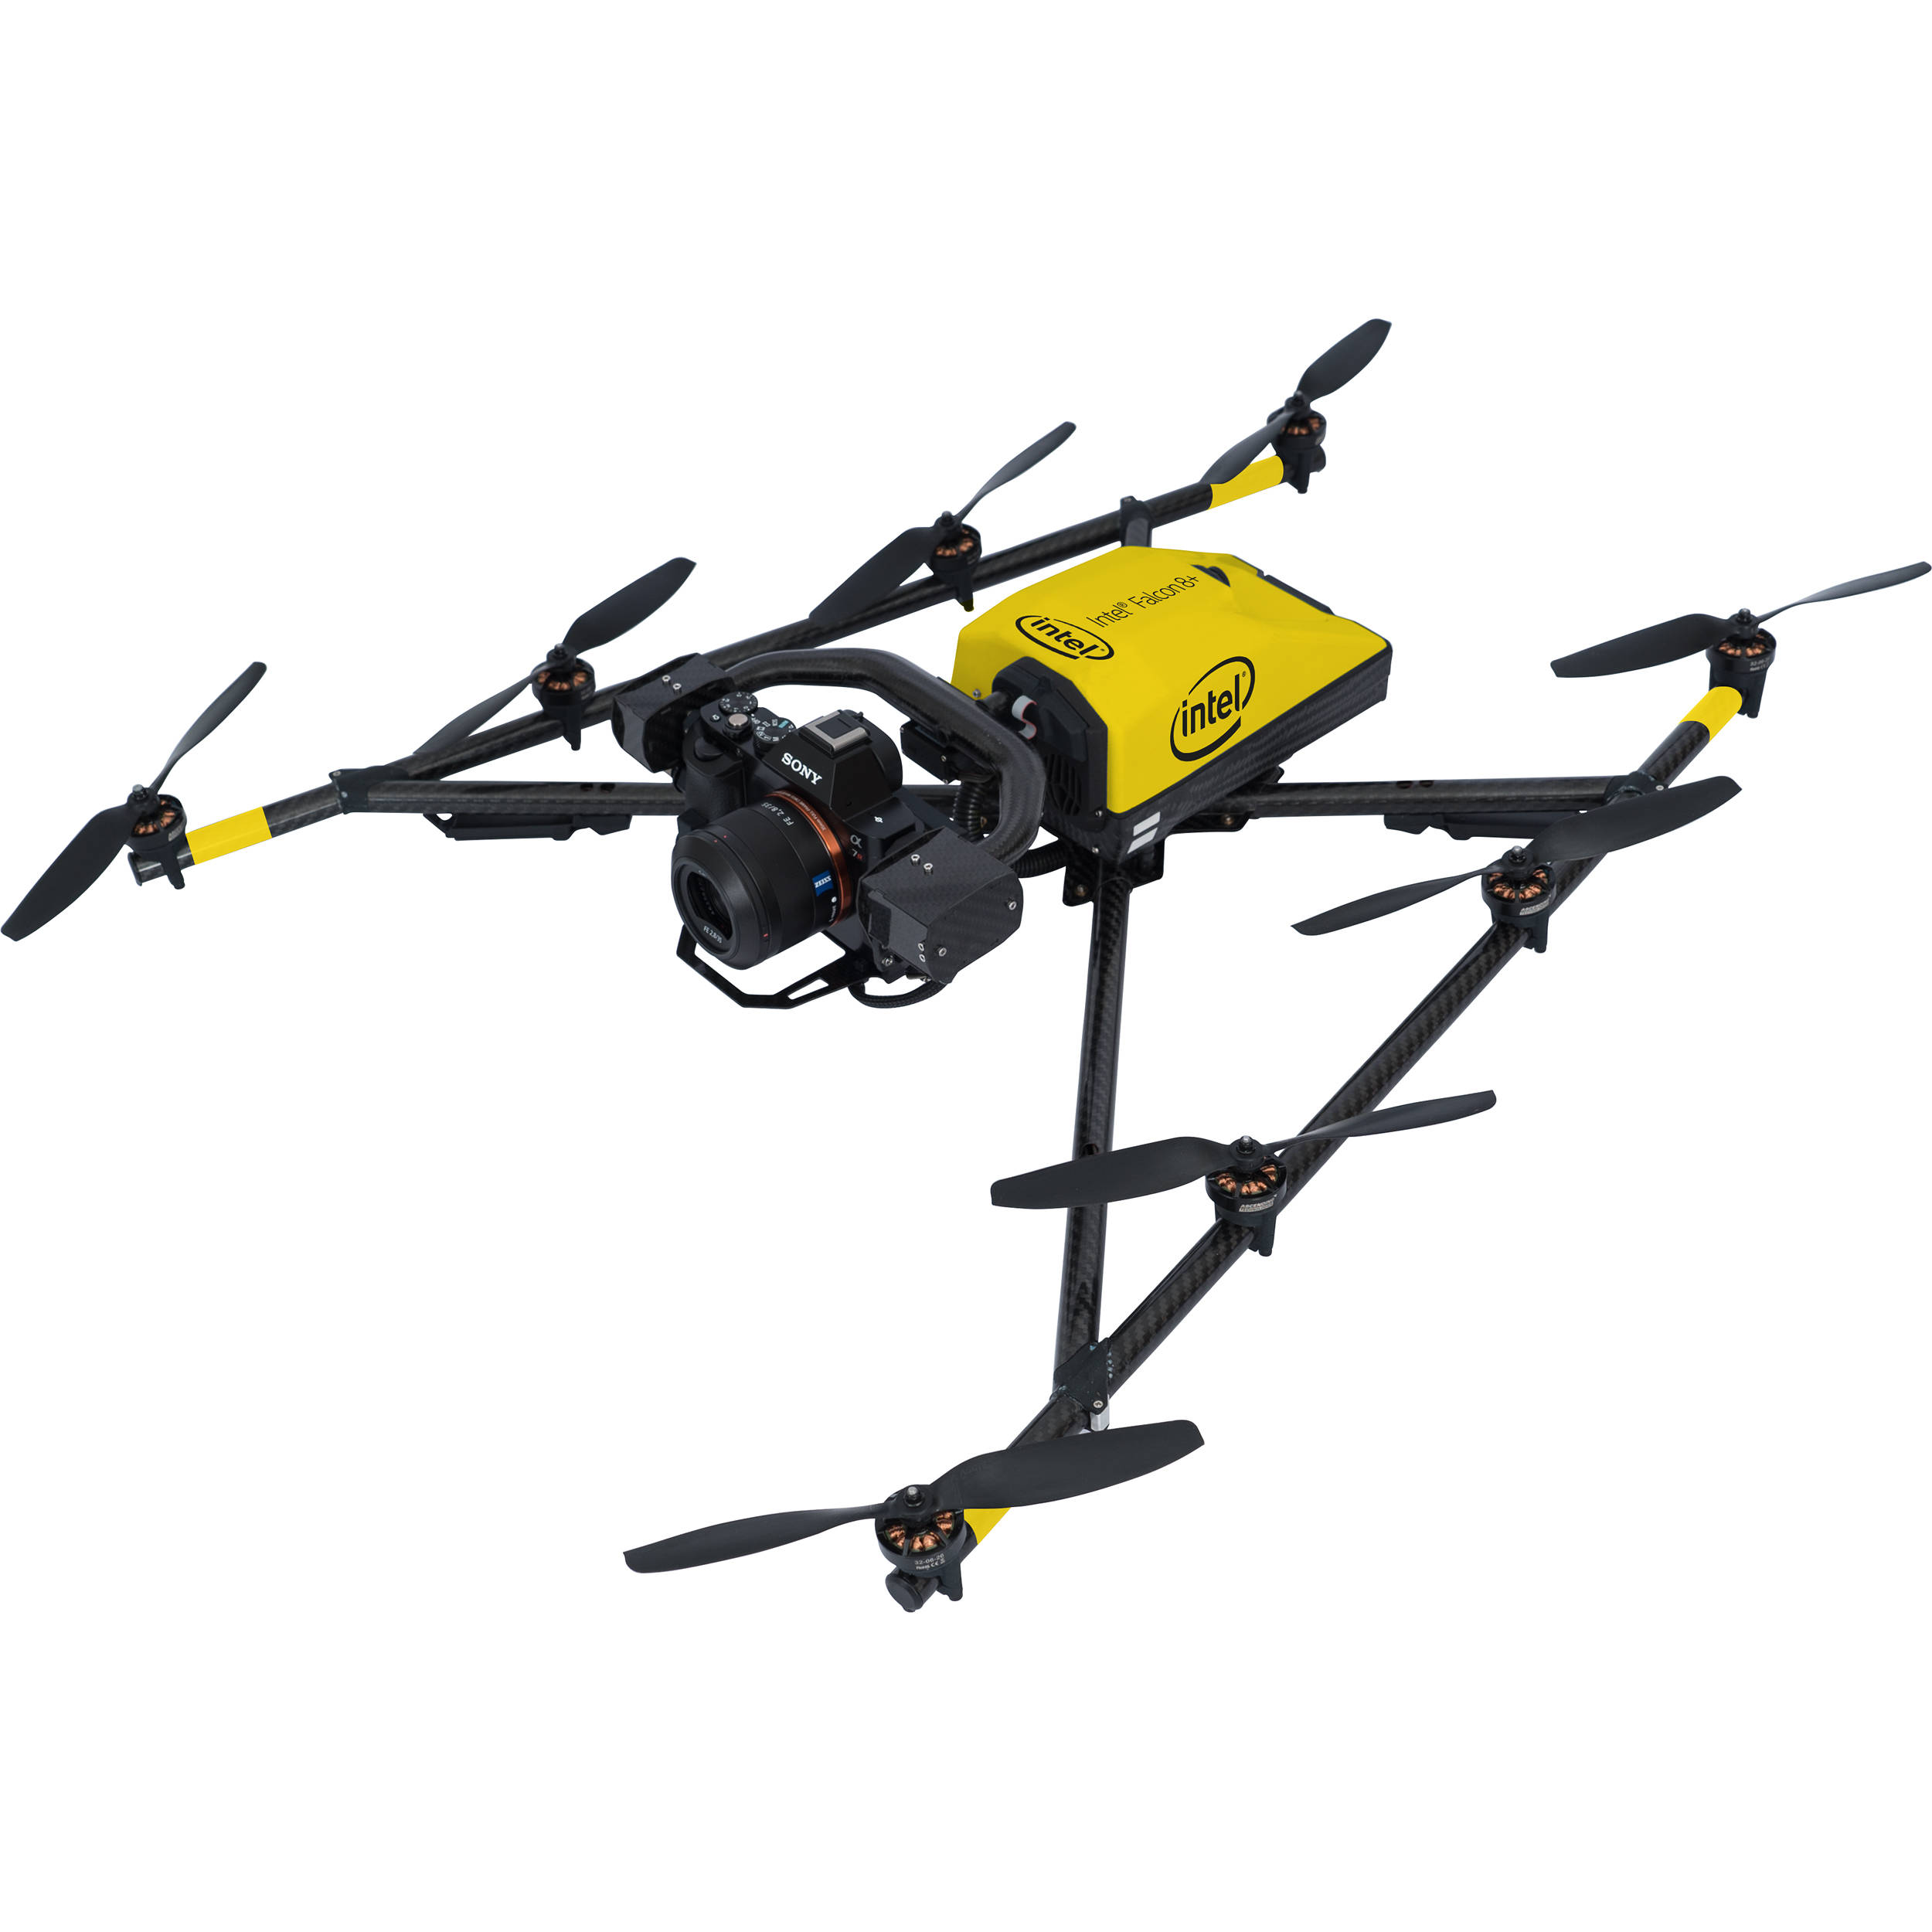 Intel Falcon 8+ Octocopter Drone with 